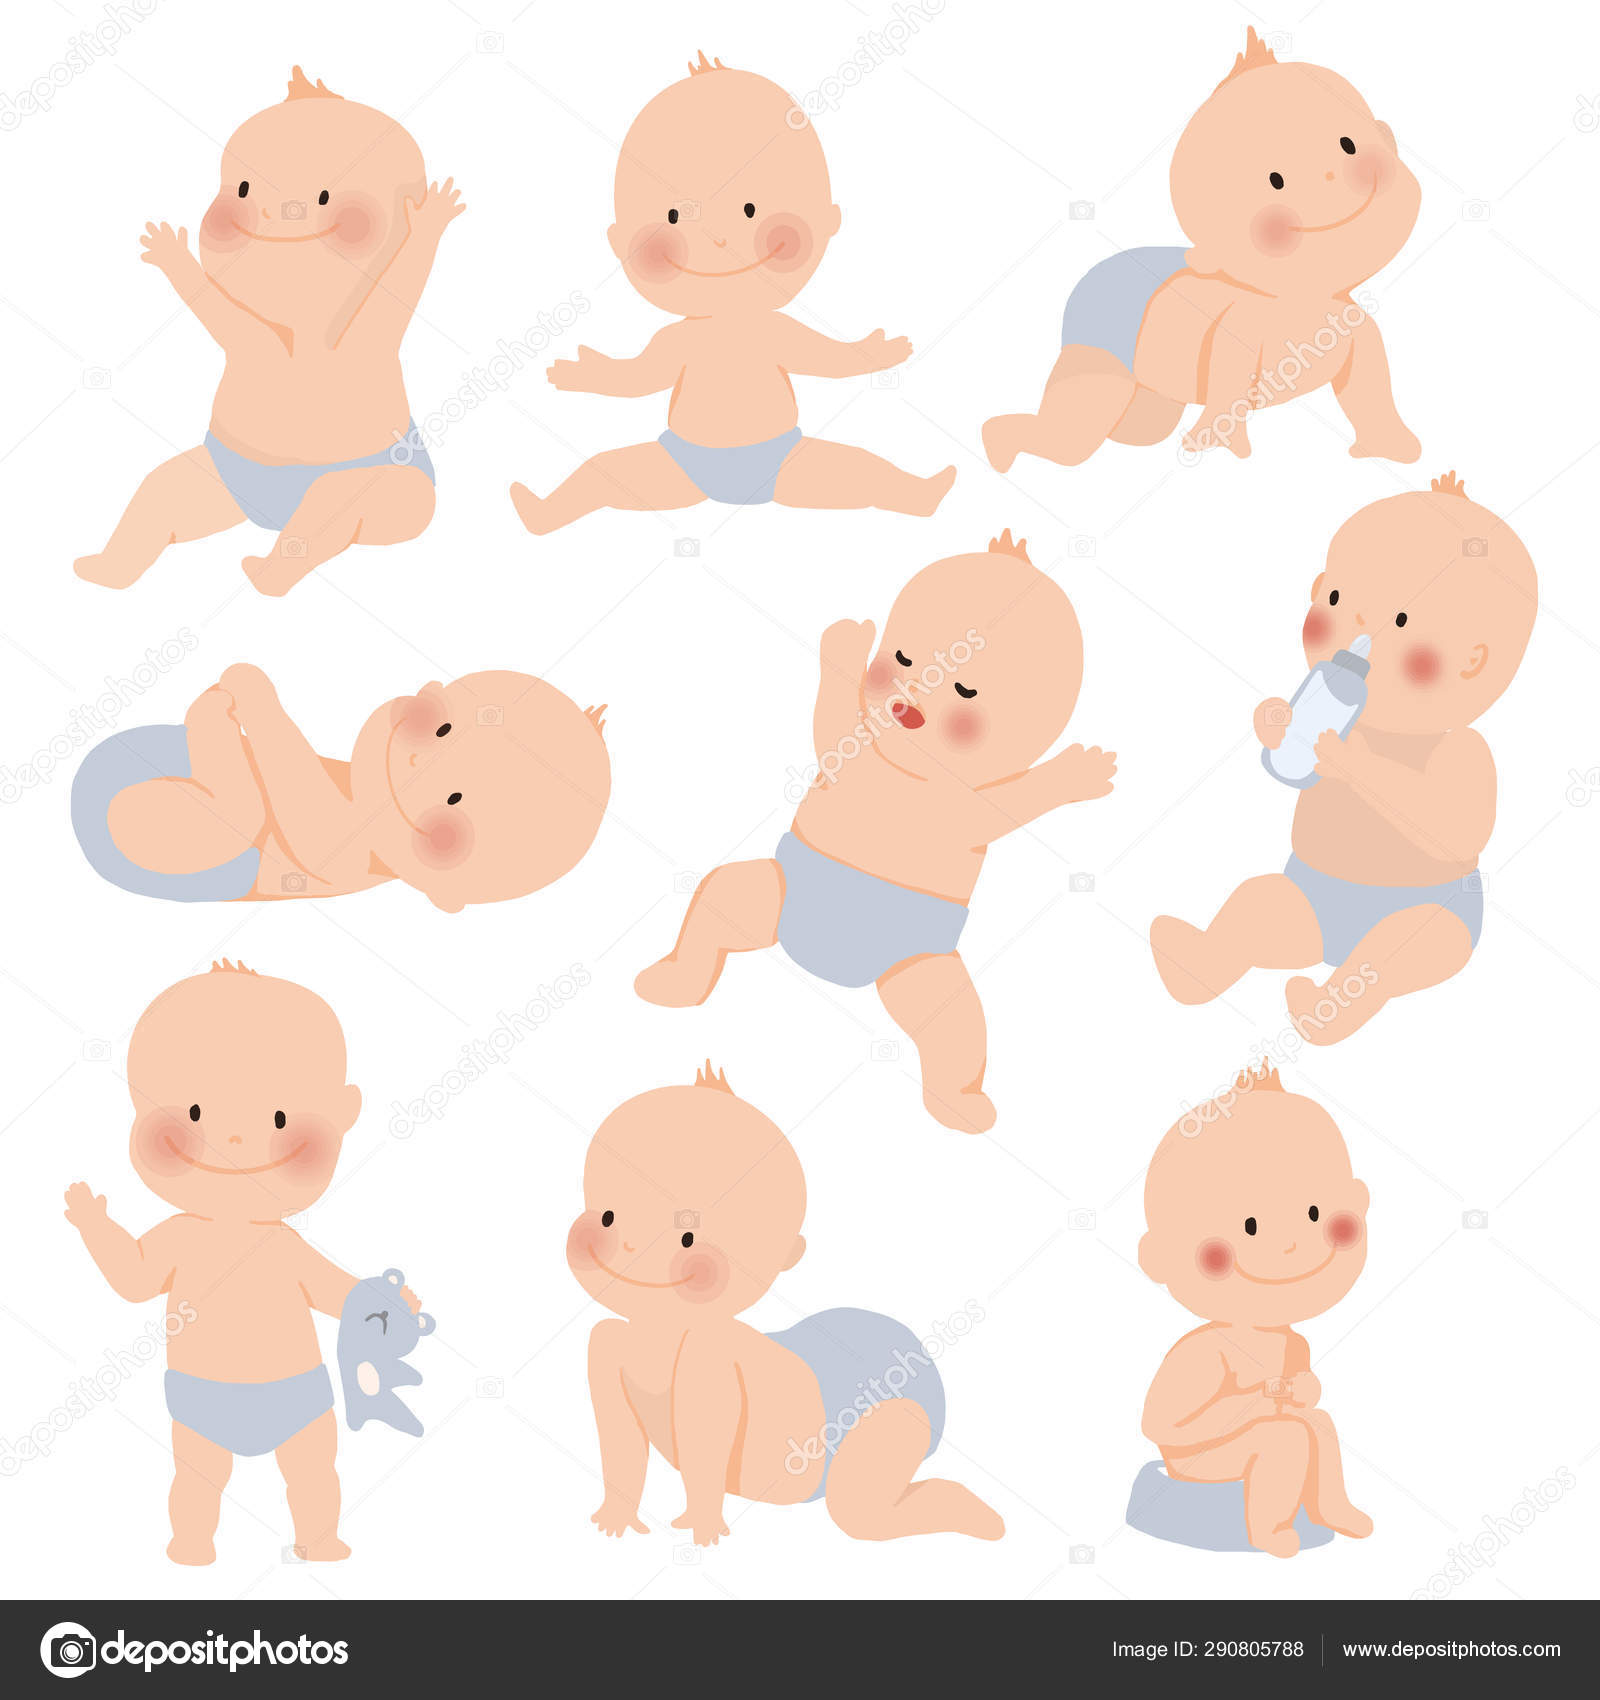 Baby Pose Images, HD Pictures For Free Vectors Download - Lovepik.com